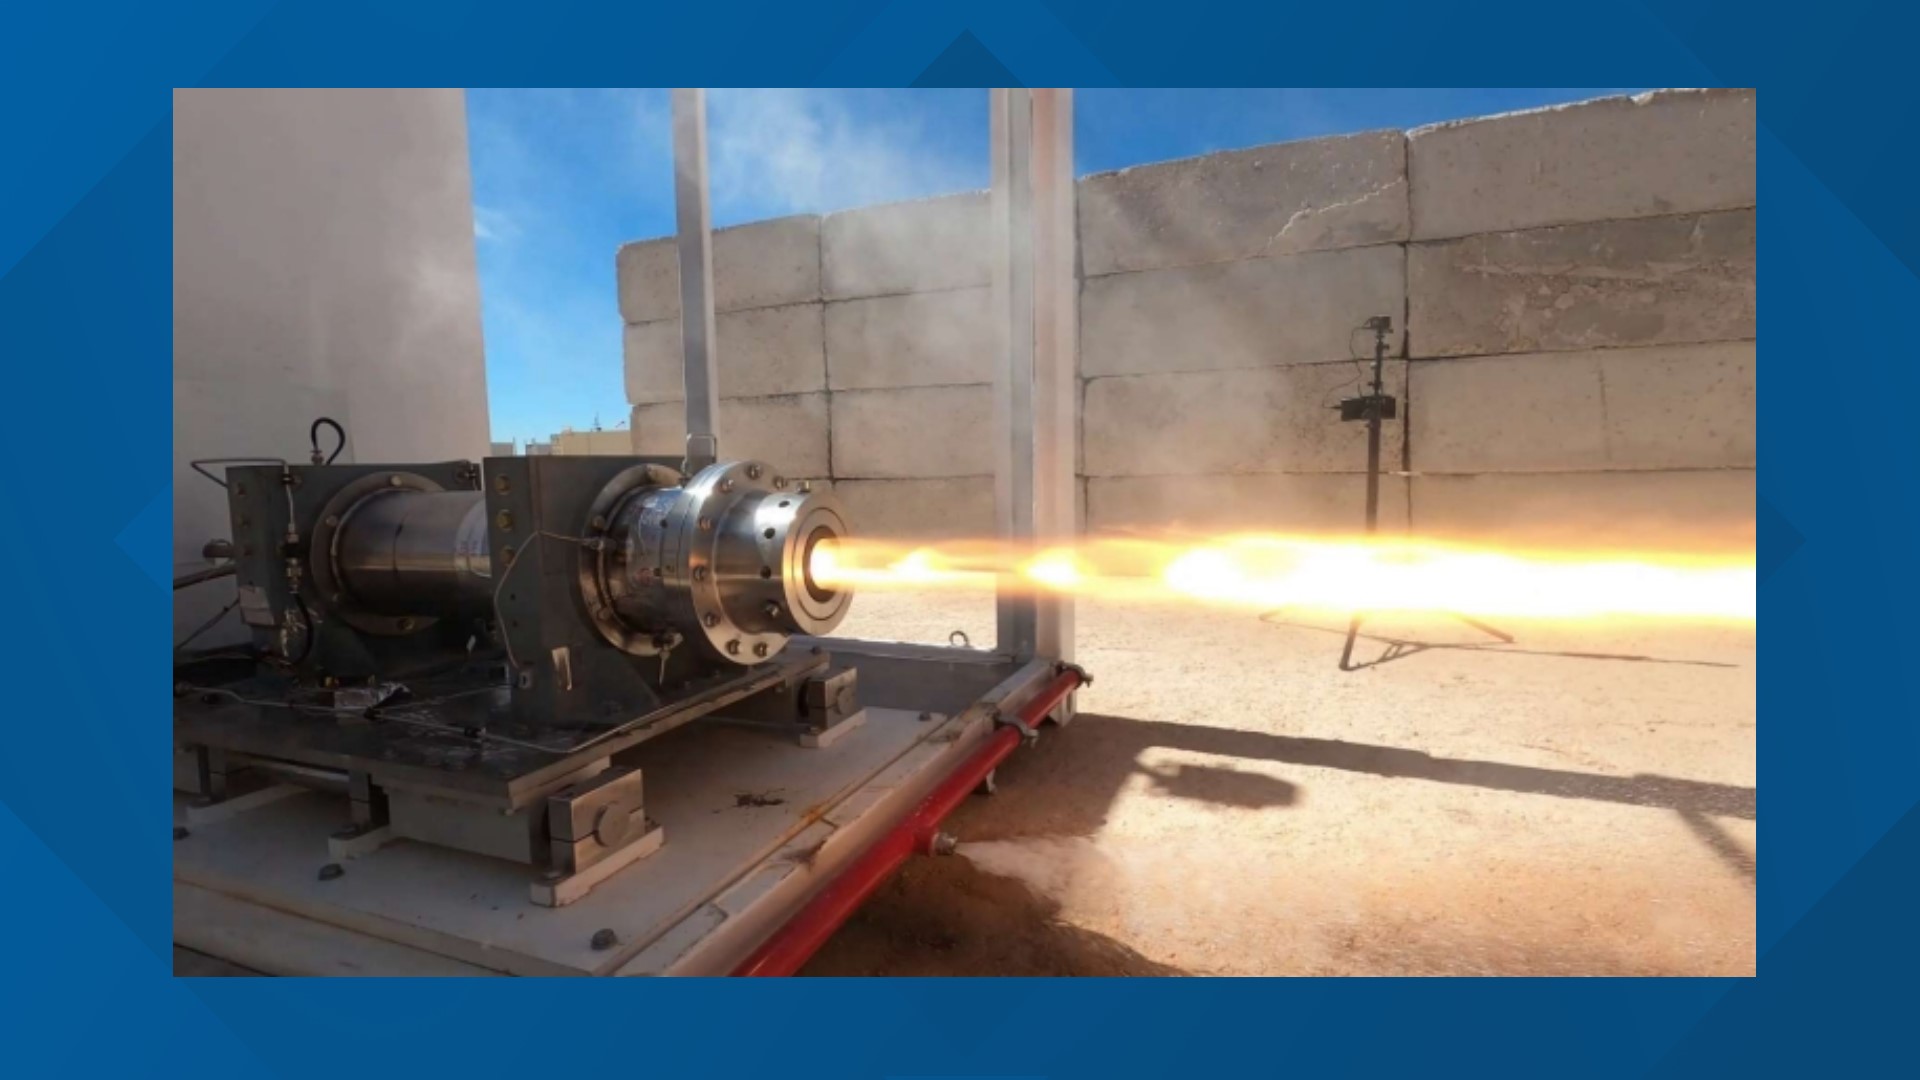 Aerospace company Firehawk completed their first hybrid rocket engine test, after breaking ground on the testing site just three months ago.